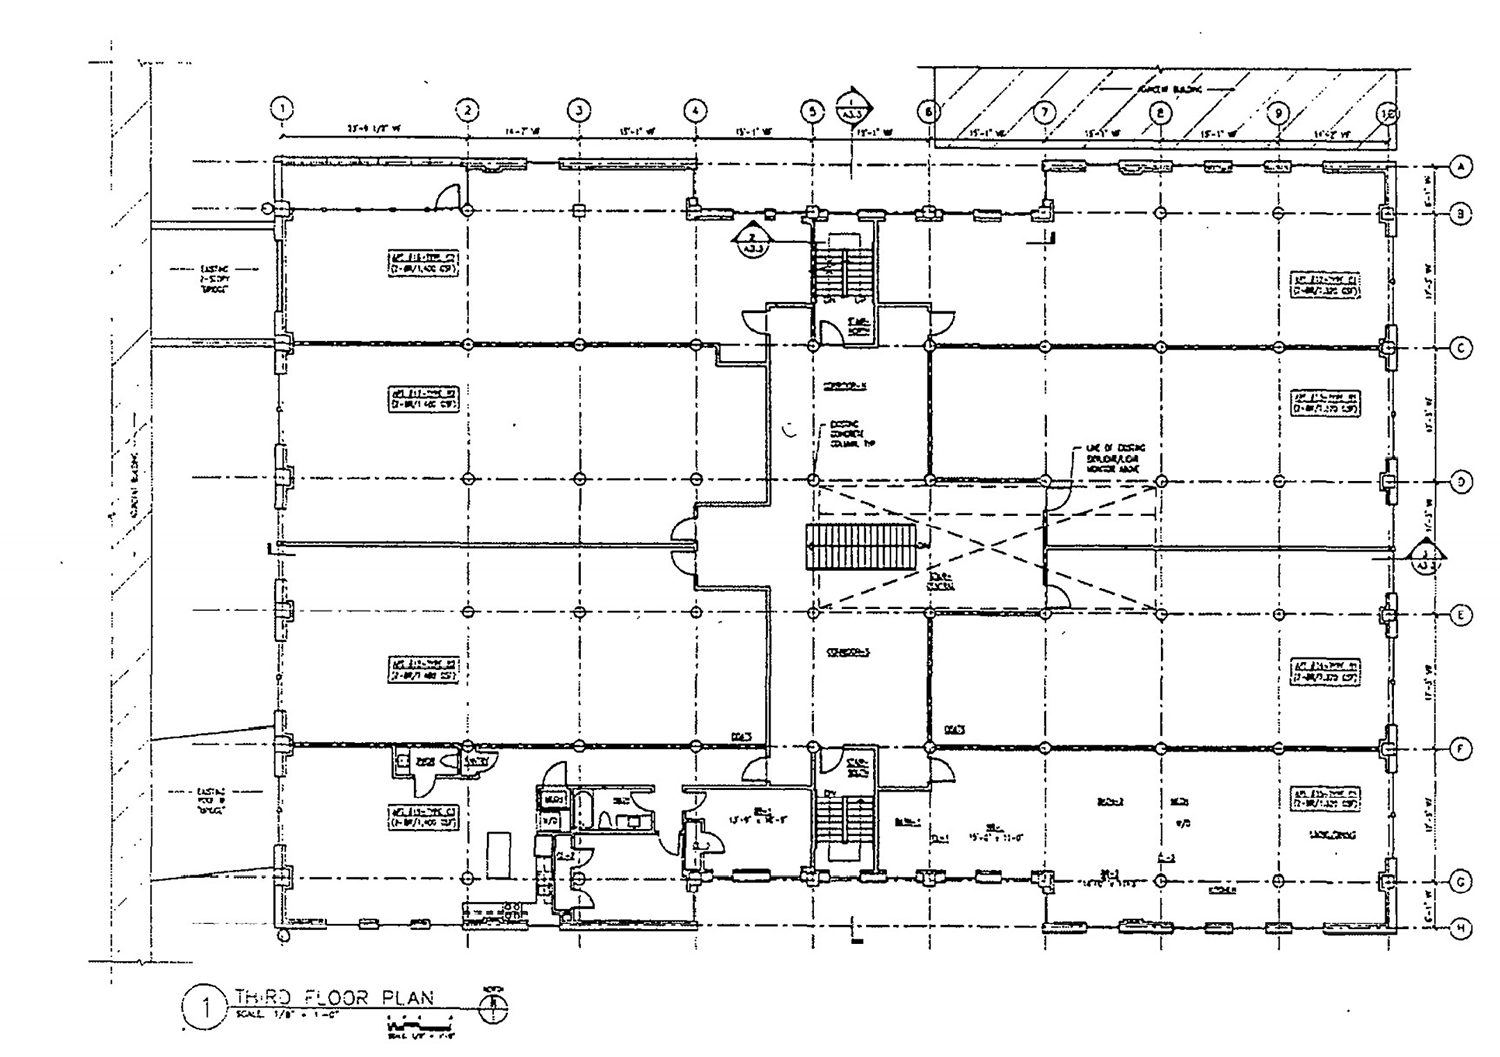 Third Floor Plan for 4046 N Hermitage Avenue. Drawing by Foster Dale Architects